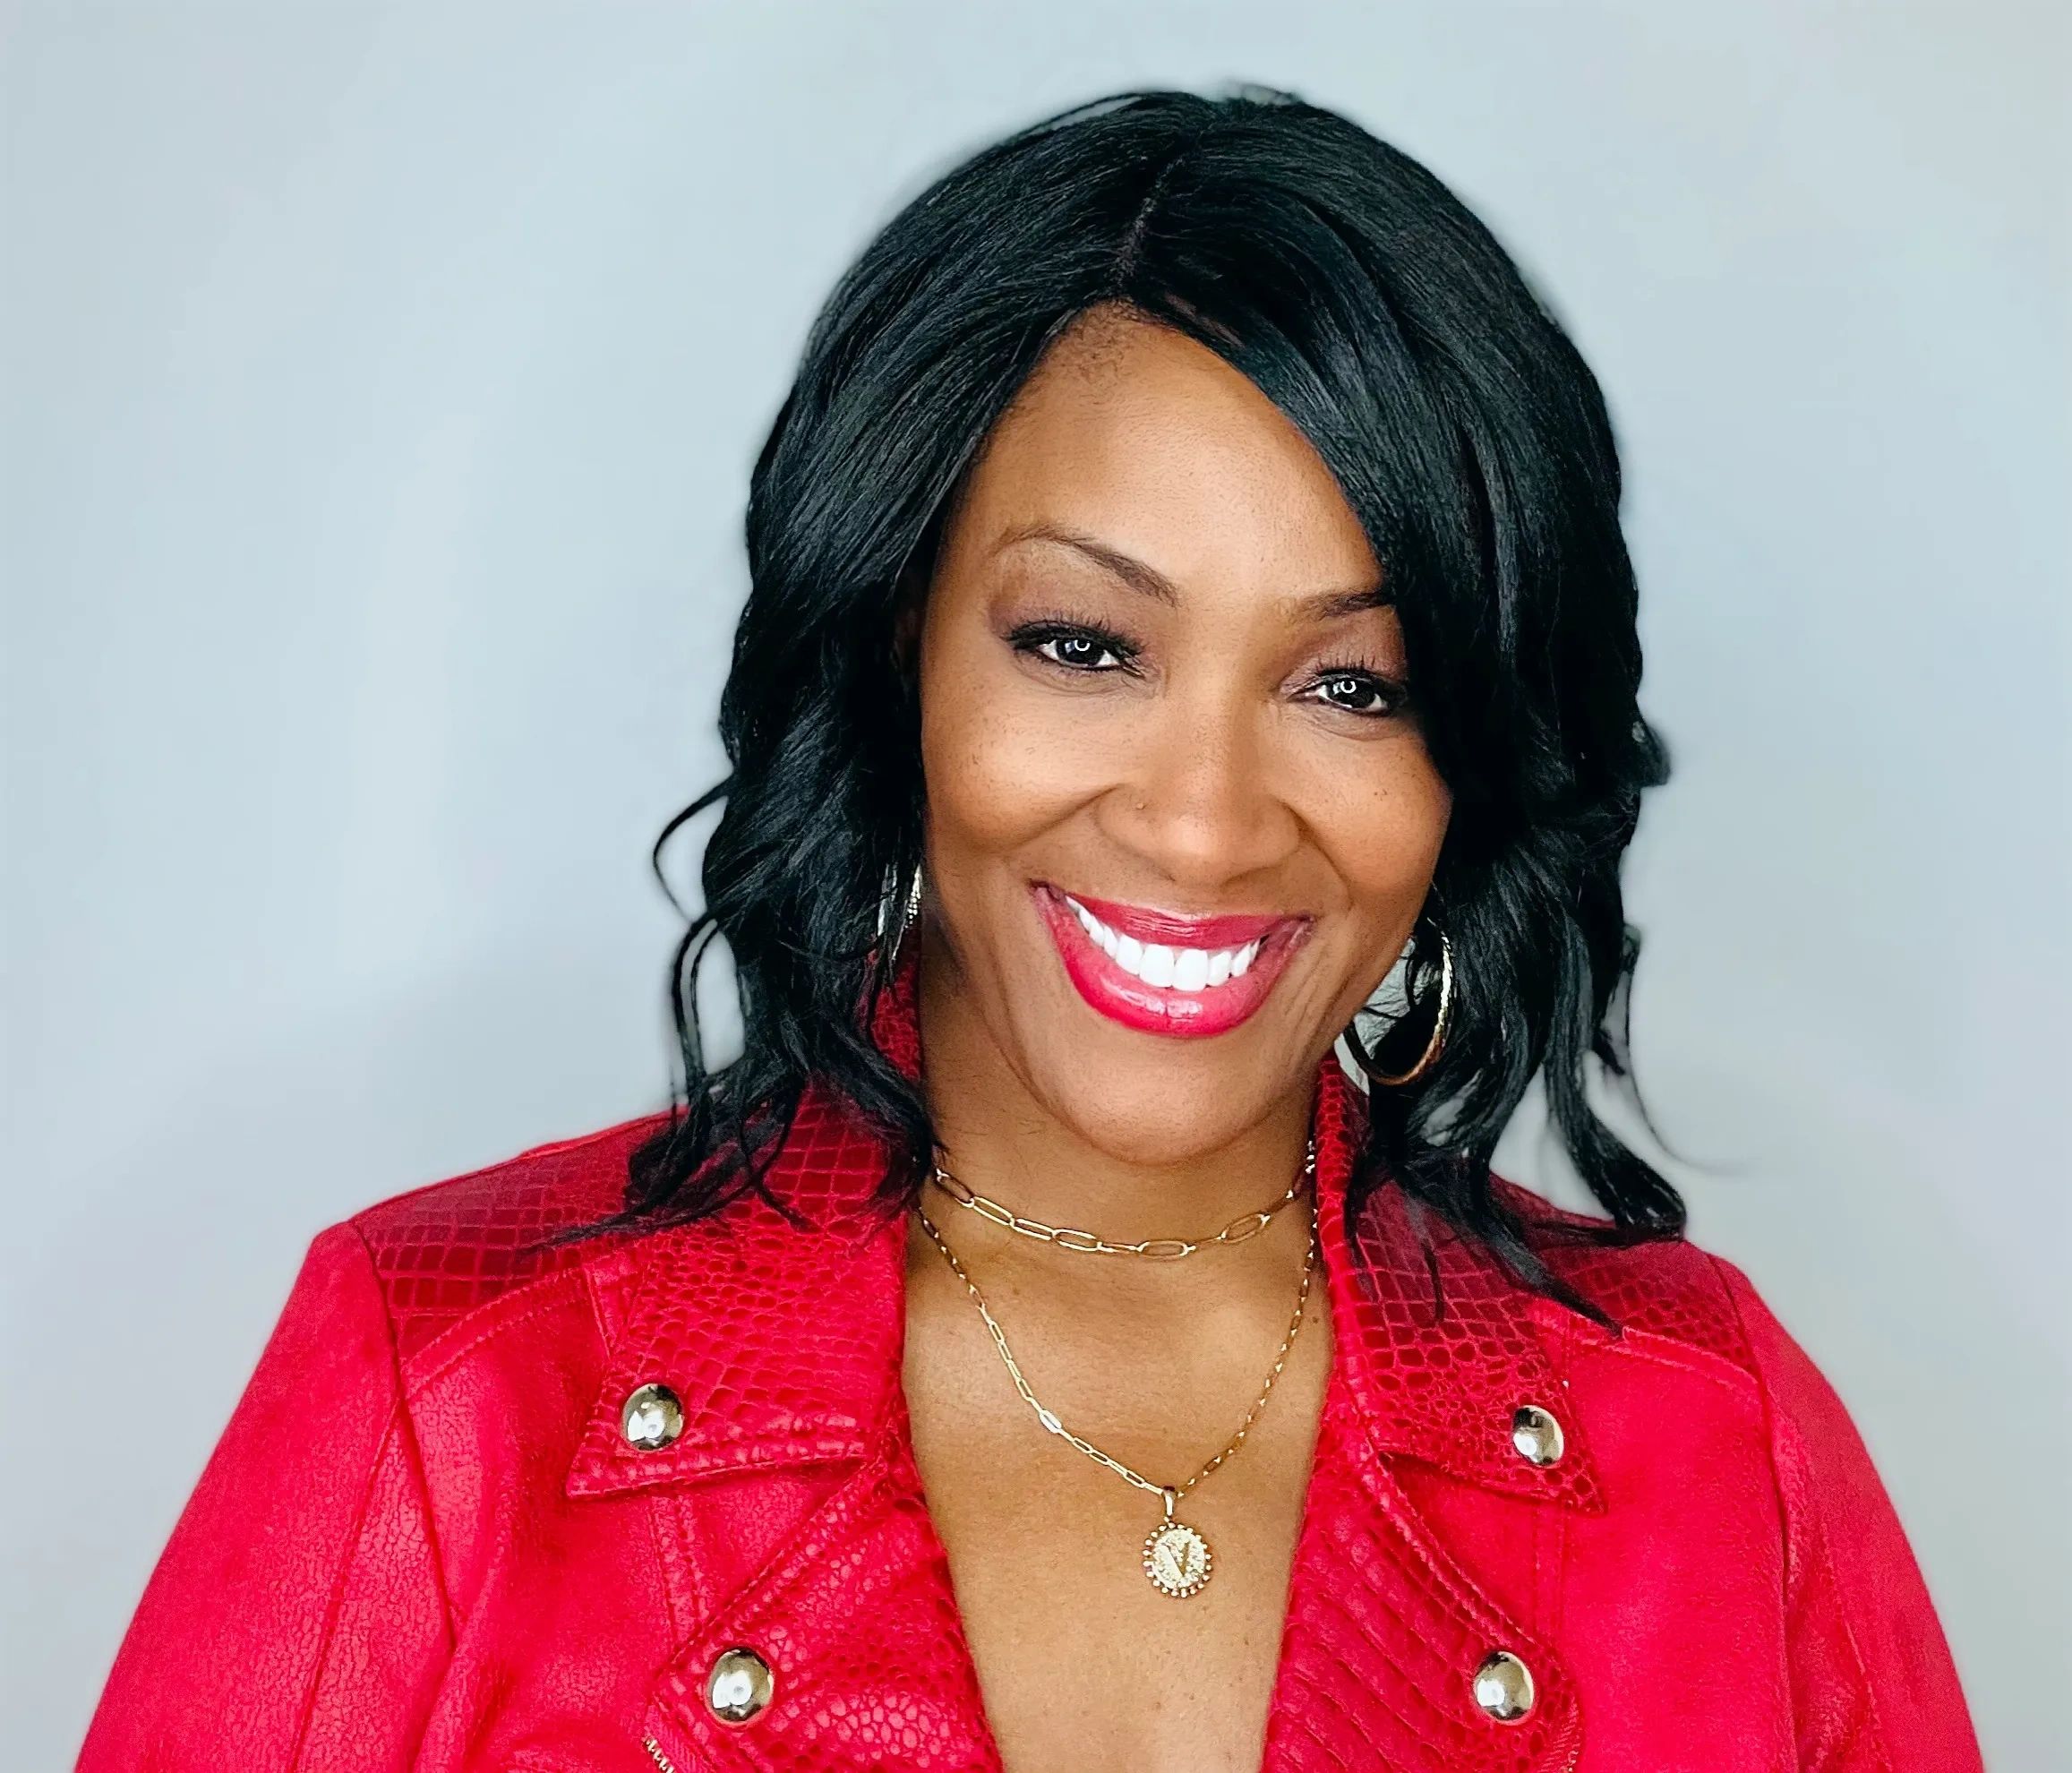 Vanessa Spence is an author, entrepreneur, motivational speaker and leadership coach.